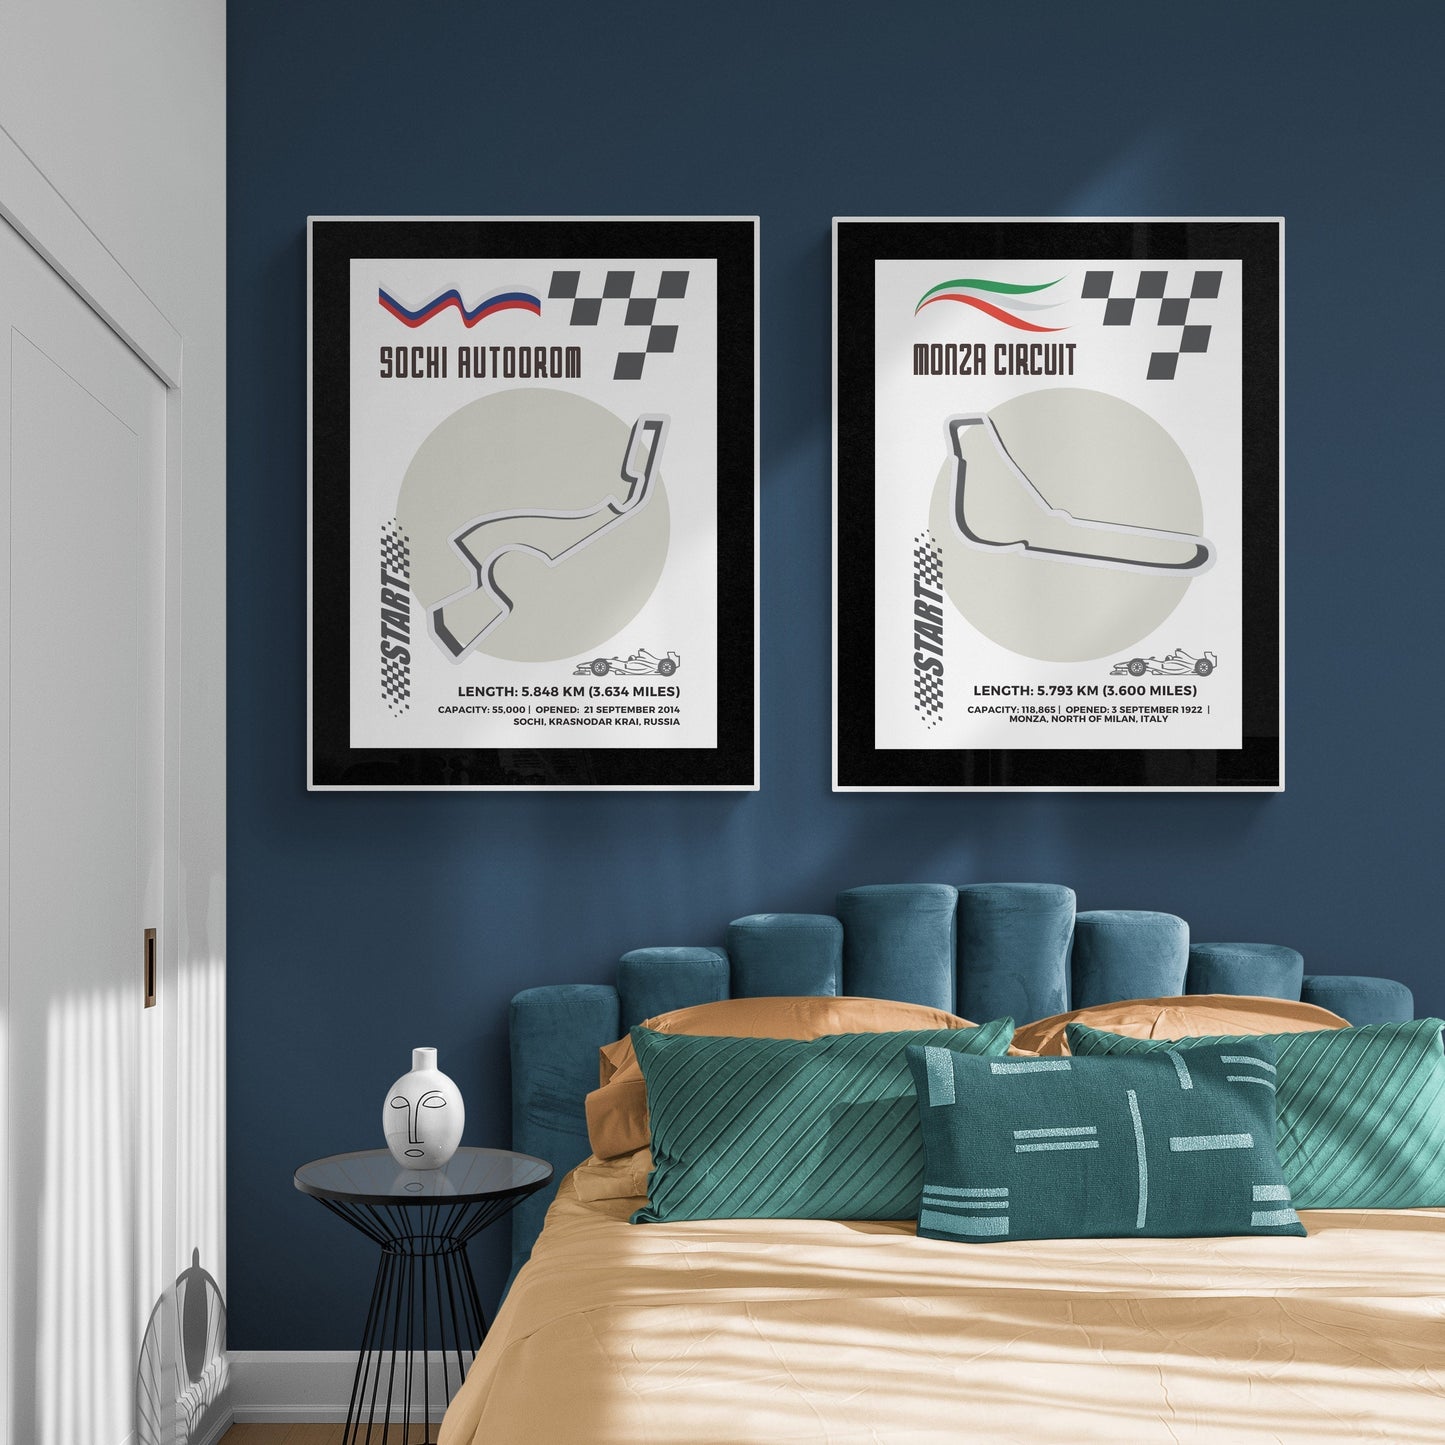 Indulge your love for Formula One with our Baku Circuit F1 Posters. Hang the map of F1 tracks on your wall, along with our "Formula One Poster," for the ultimate racing fan experience. Printed on UK-made, age-resistant paper, each poster includes a detailed history, year of construction, and notable moments of the circuit. Satisfaction guaranteed for every F1 enthusiast.